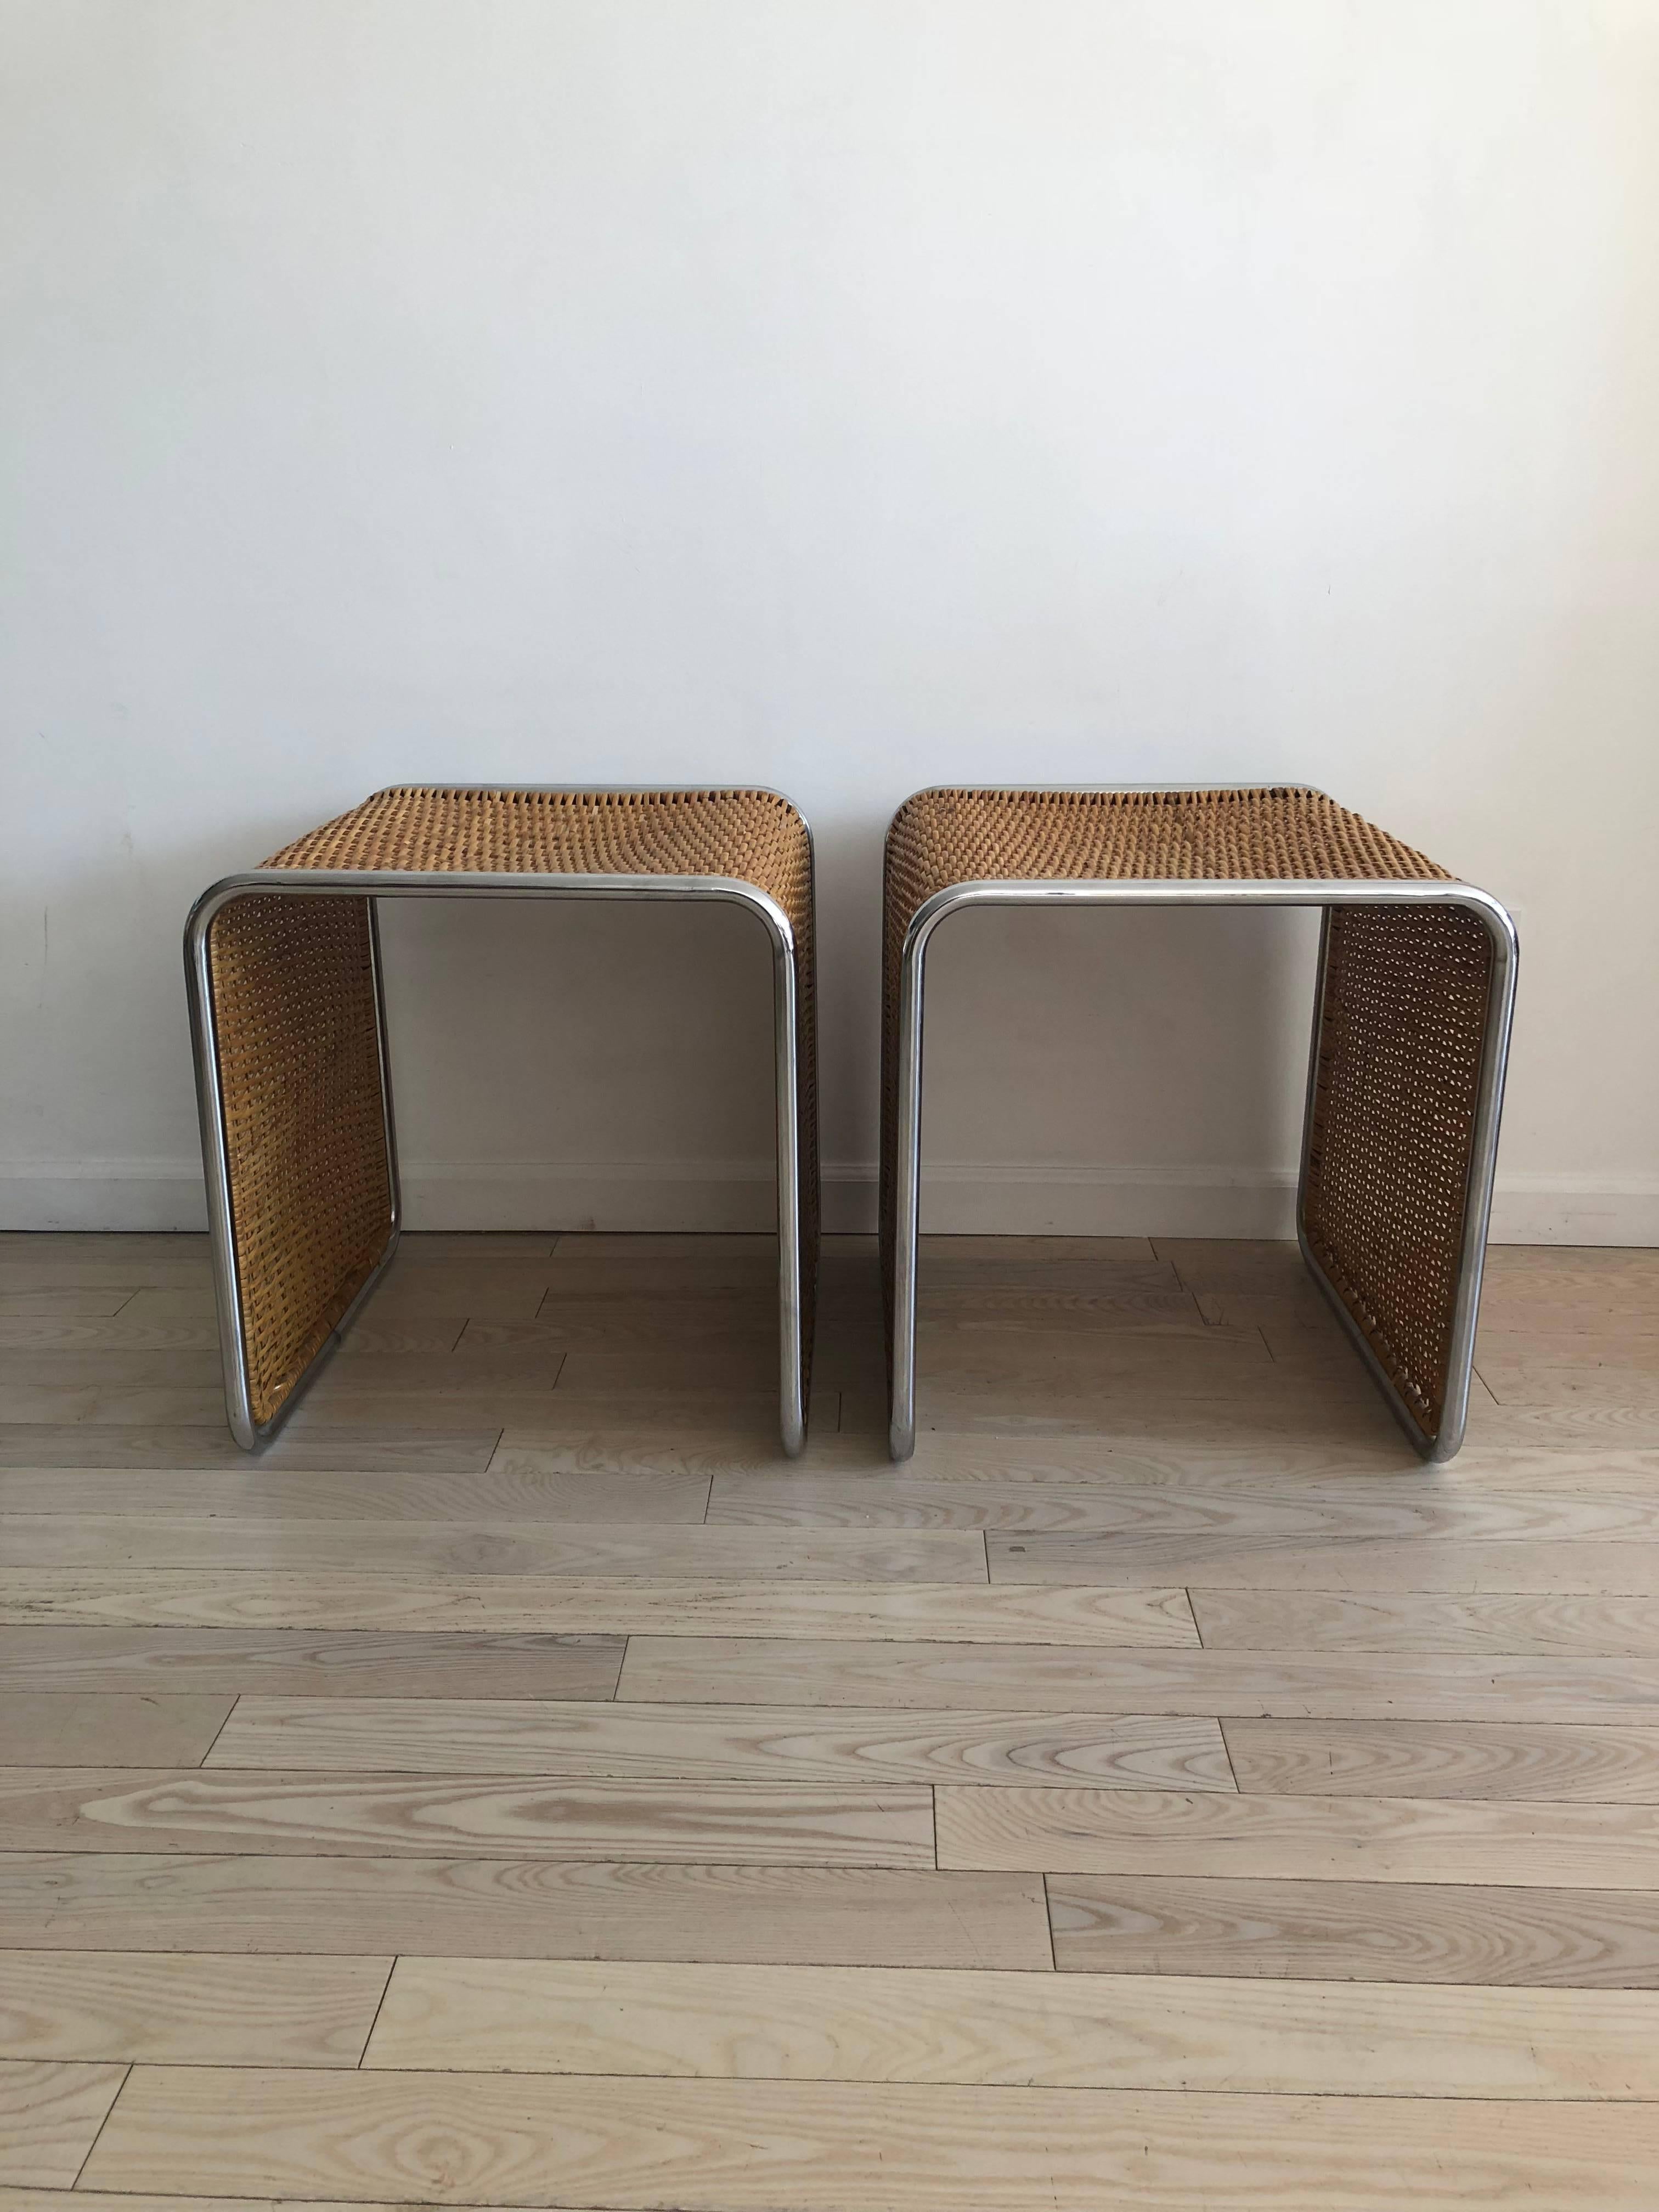 Amazing and rare wicker and chrome waterfall shaped side tables / stools.
Excellent condition, a few minor breaks in weave. Pretty shinny chrome. One piece of bent tubular chrome in the style of Mies van der Rohe. Can be uses as side tables or